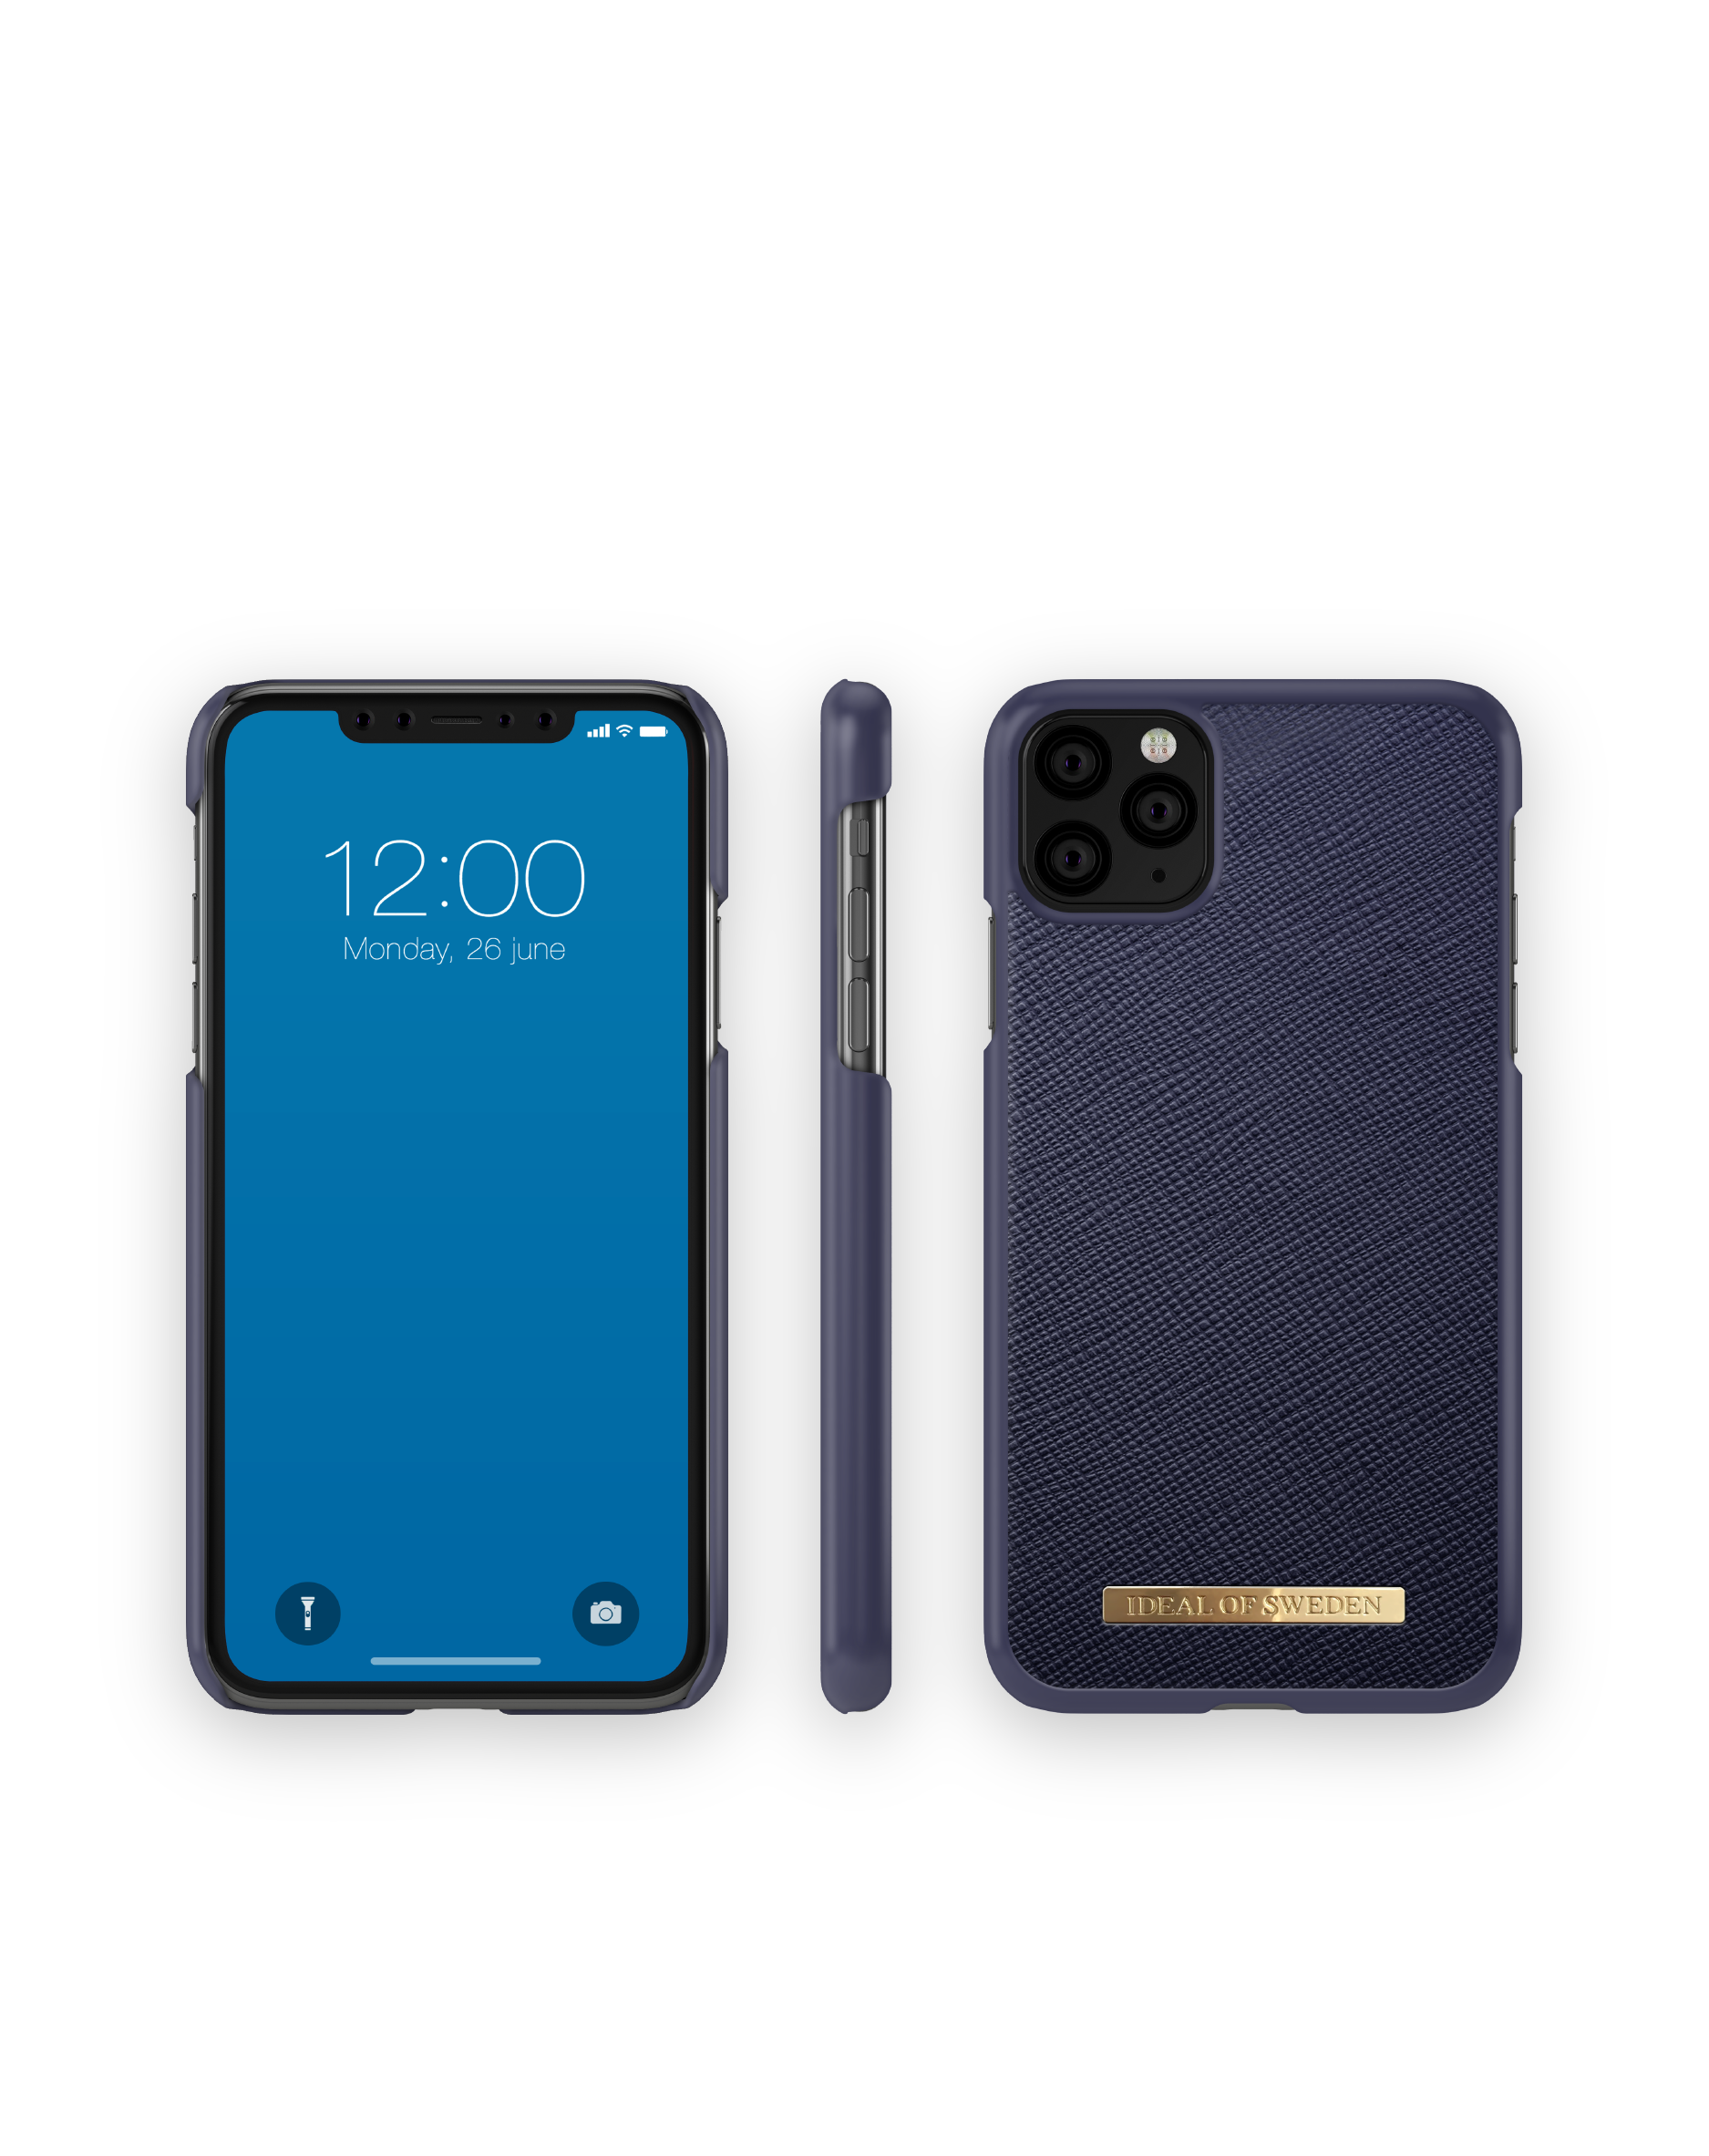 IDEAL Apple, Pro iPhone 11 Apple XS OF IDFCSA-I1965-50, Apple Max, Navy SWEDEN iPhone Max, Backcover,